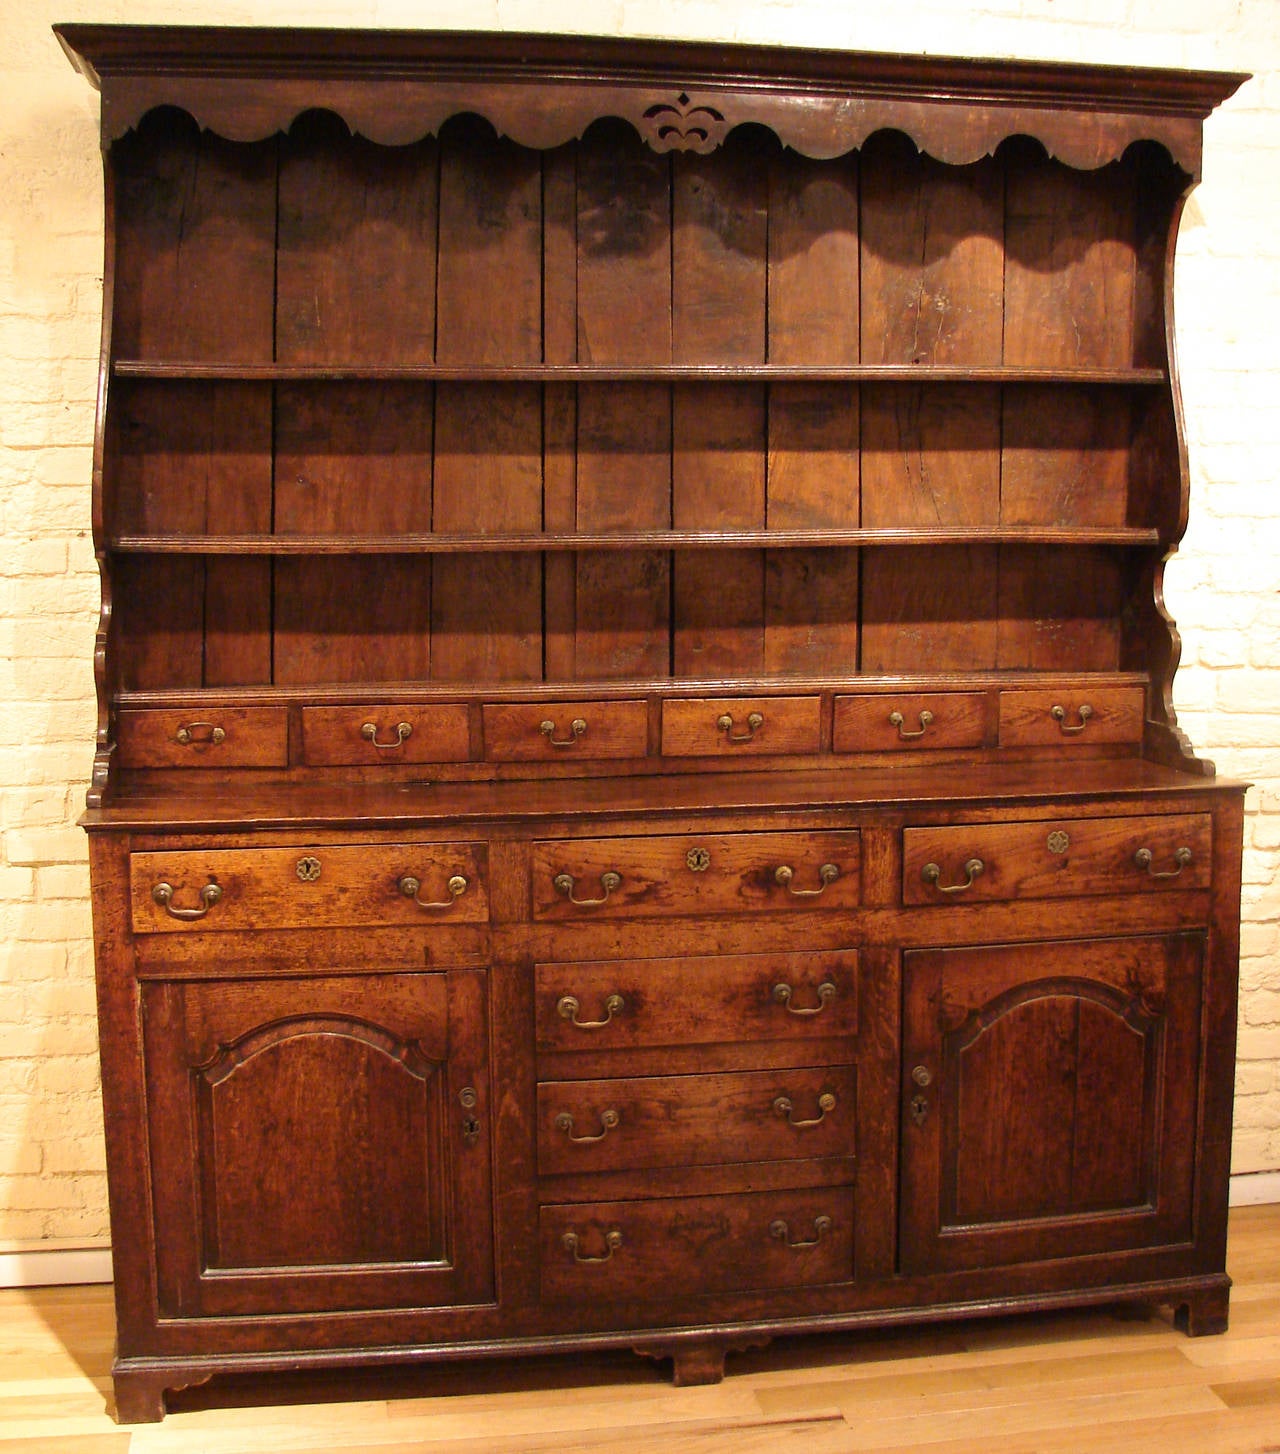 A fine and large English or Welsh oak high dresser, the upper stage with three shelves and six small drawers under a scalloped hood with central decoration, resting on a base with six drawers and two cupboards with fielded panel doors all on bracket